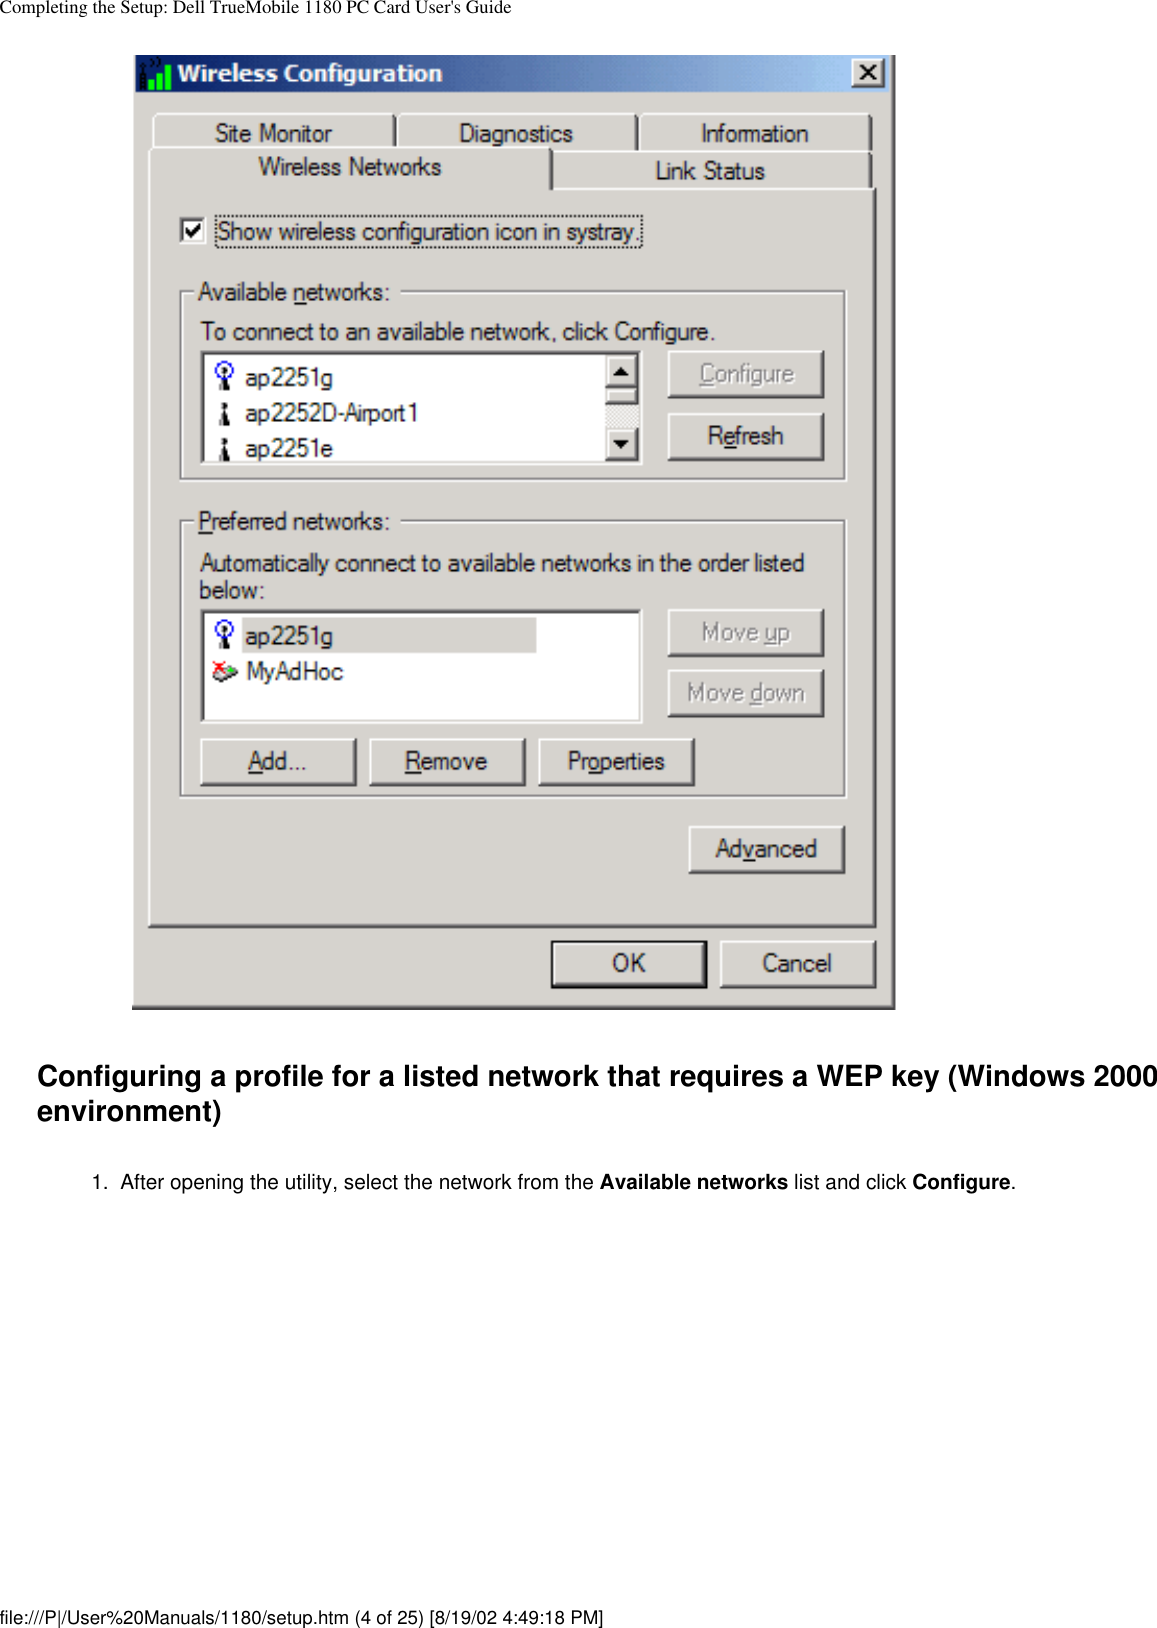 Completing the Setup: Dell TrueMobile 1180 PC Card User&apos;s GuideConfiguring a profile for a listed network that requires a WEP key (Windows 2000 environment)1.  After opening the utility, select the network from the Available networks list and click Configure. file:///P|/User%20Manuals/1180/setup.htm (4 of 25) [8/19/02 4:49:18 PM]